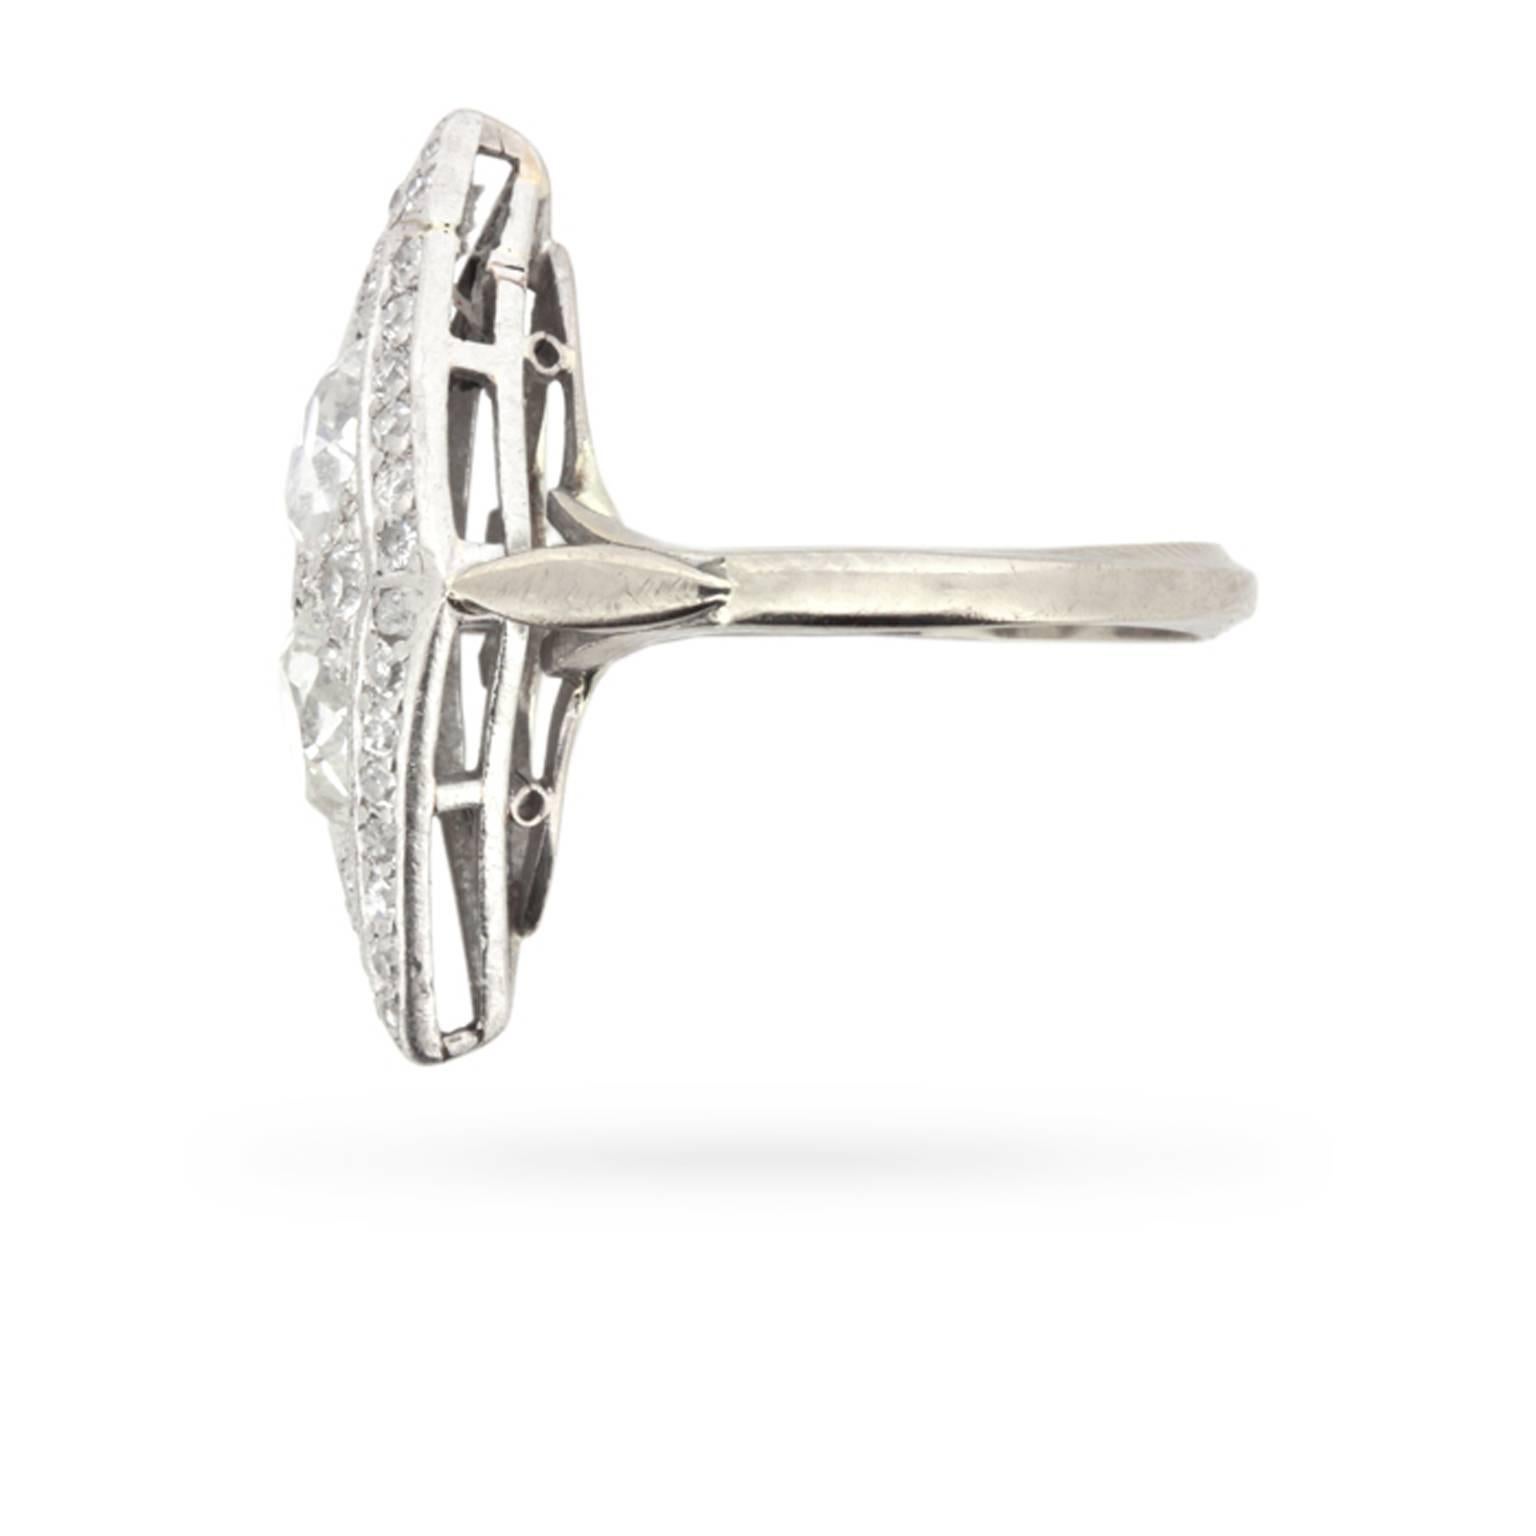 An old cut diamond set at each cardinal point complements two pear-shaped diamonds totalling 1.30 carats, which have been set end to end, forming a marquise shape at the centre of this Edwardian era dinner ring.

A delicate border of old cut